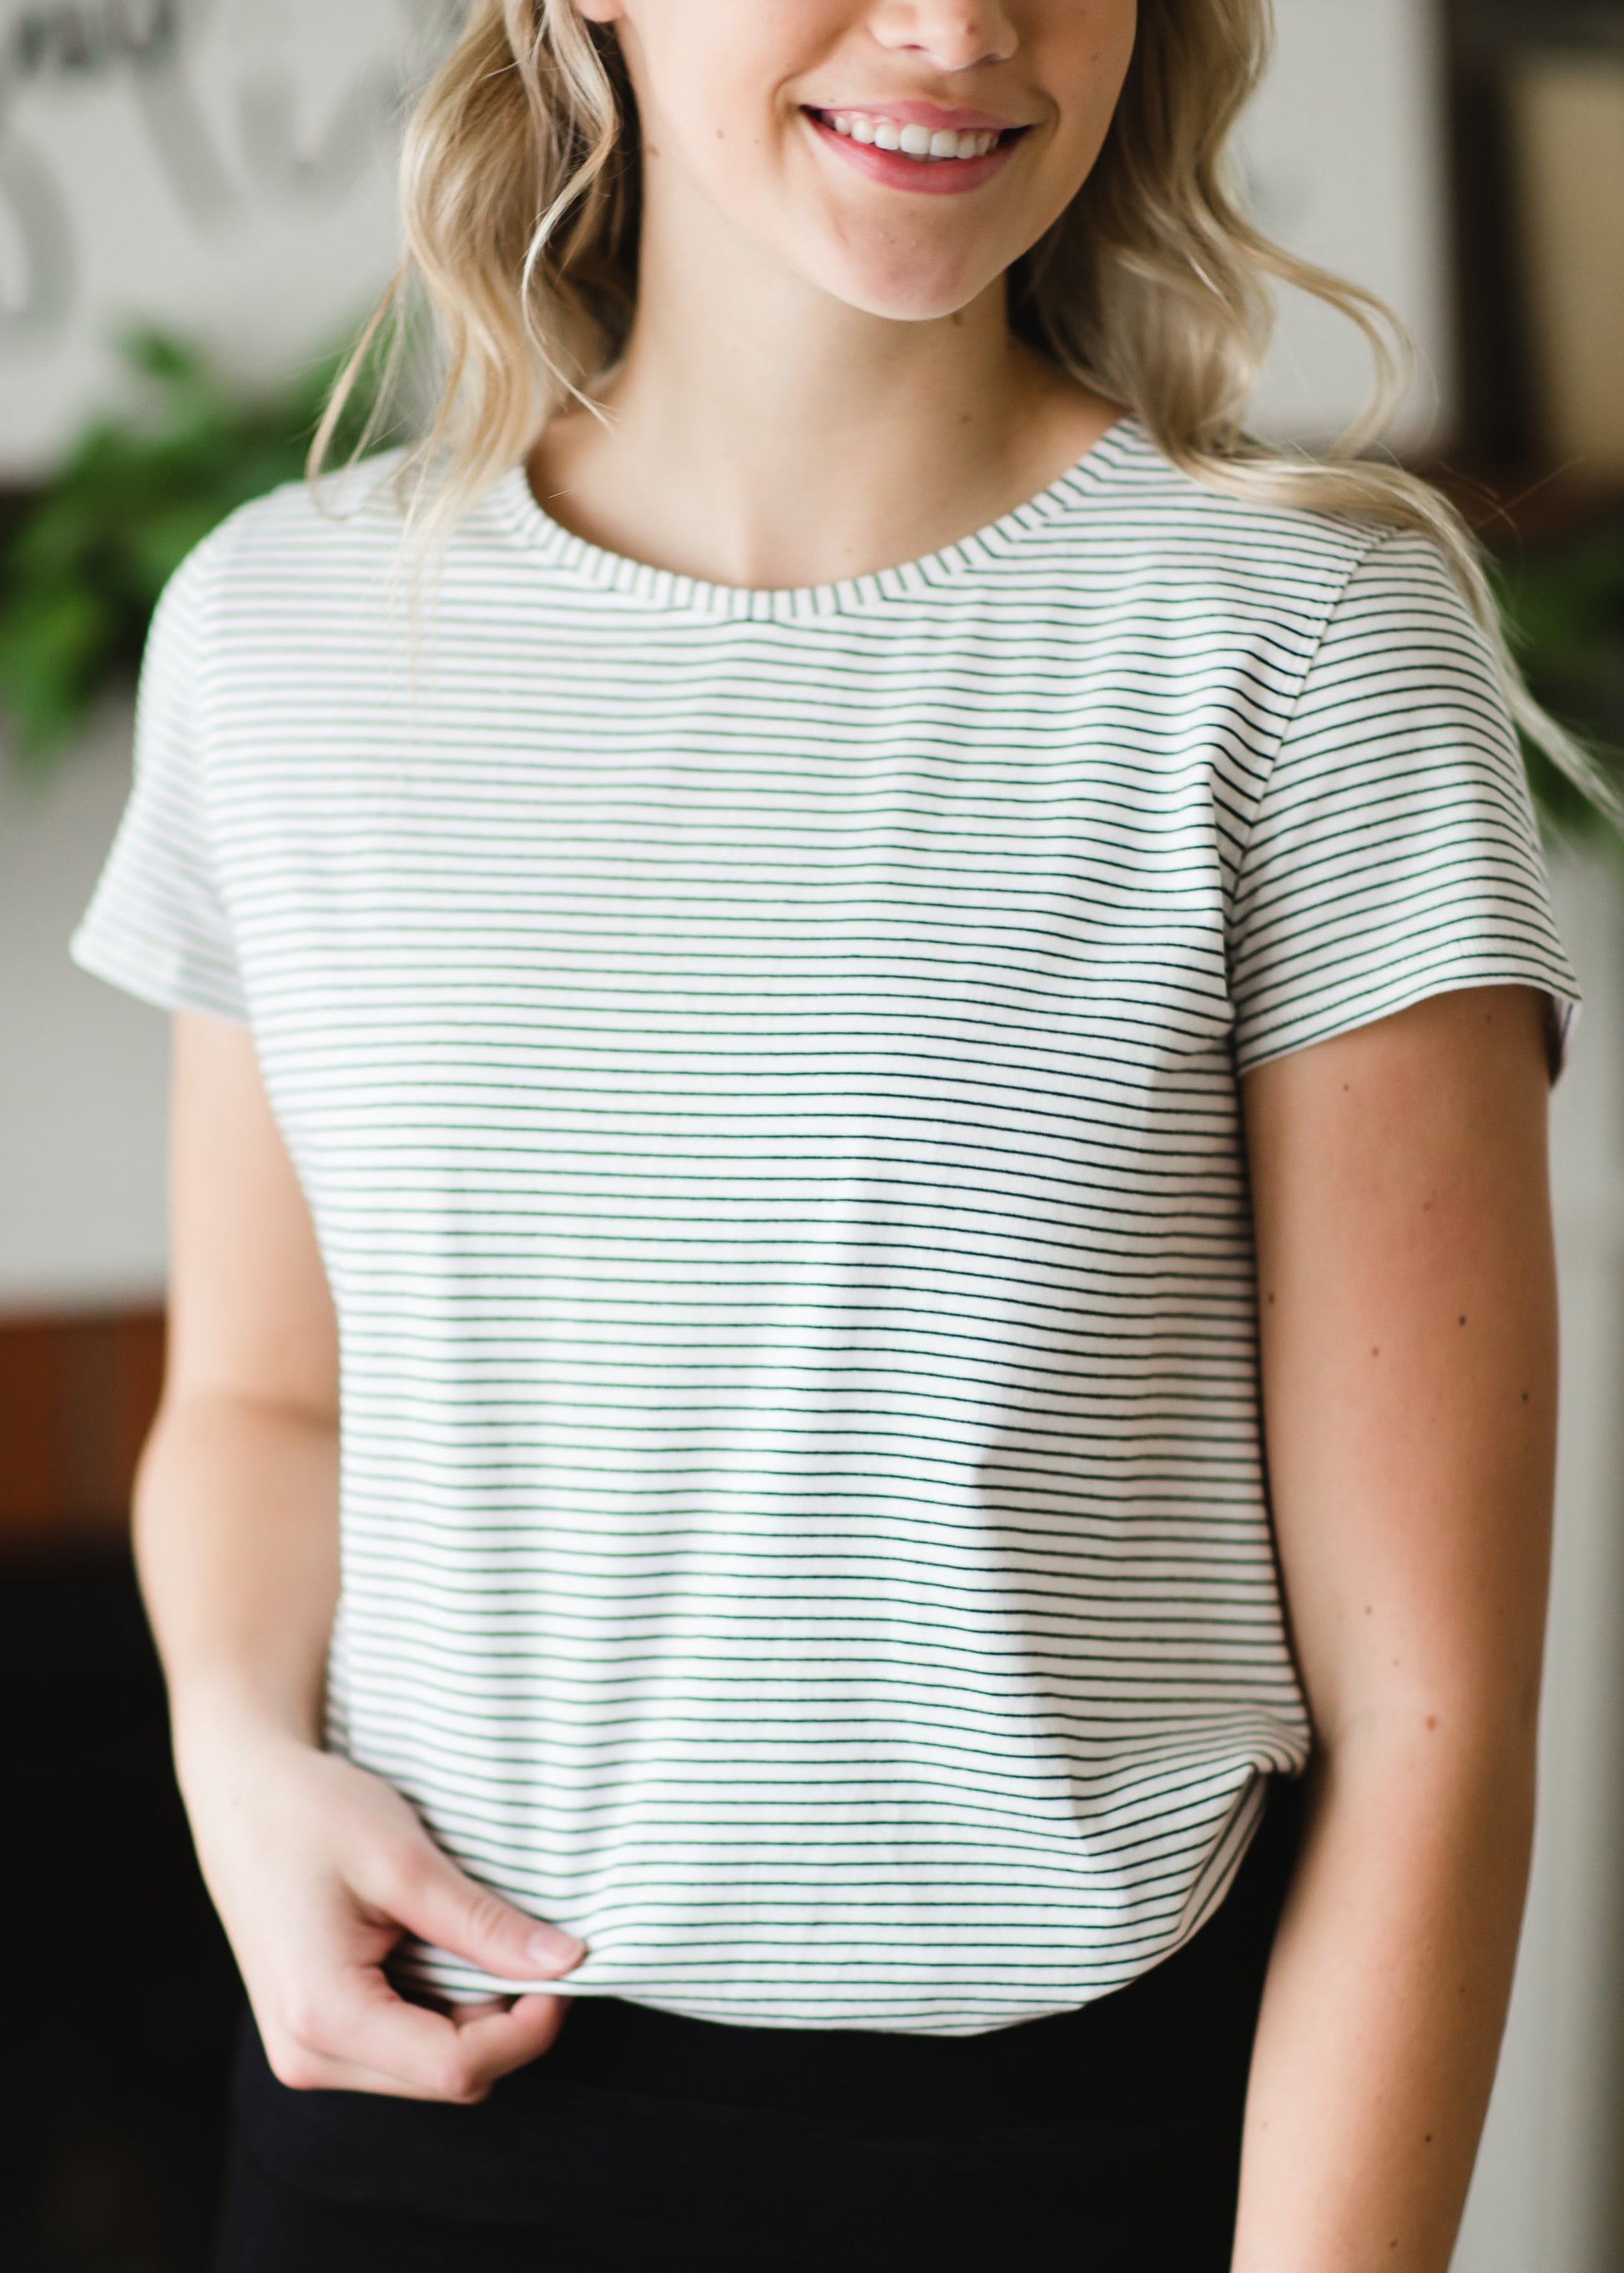 Ivory Basic Crew Neck Striped Tee - FINAL SALE Tops 2XL